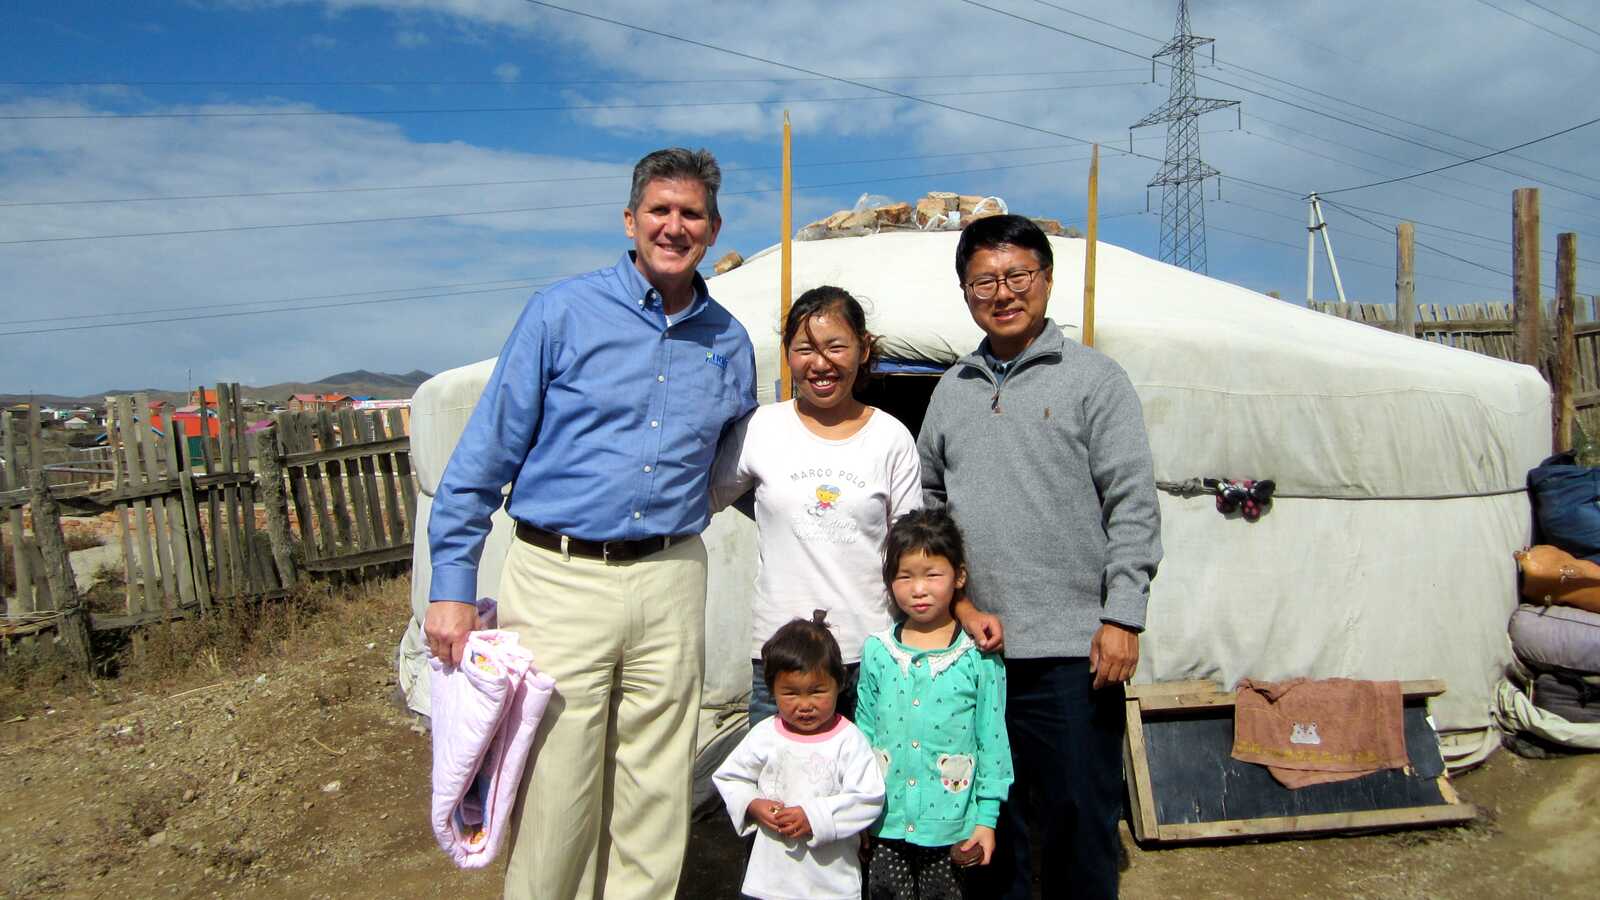 Phil with Paul and family in Mongolia